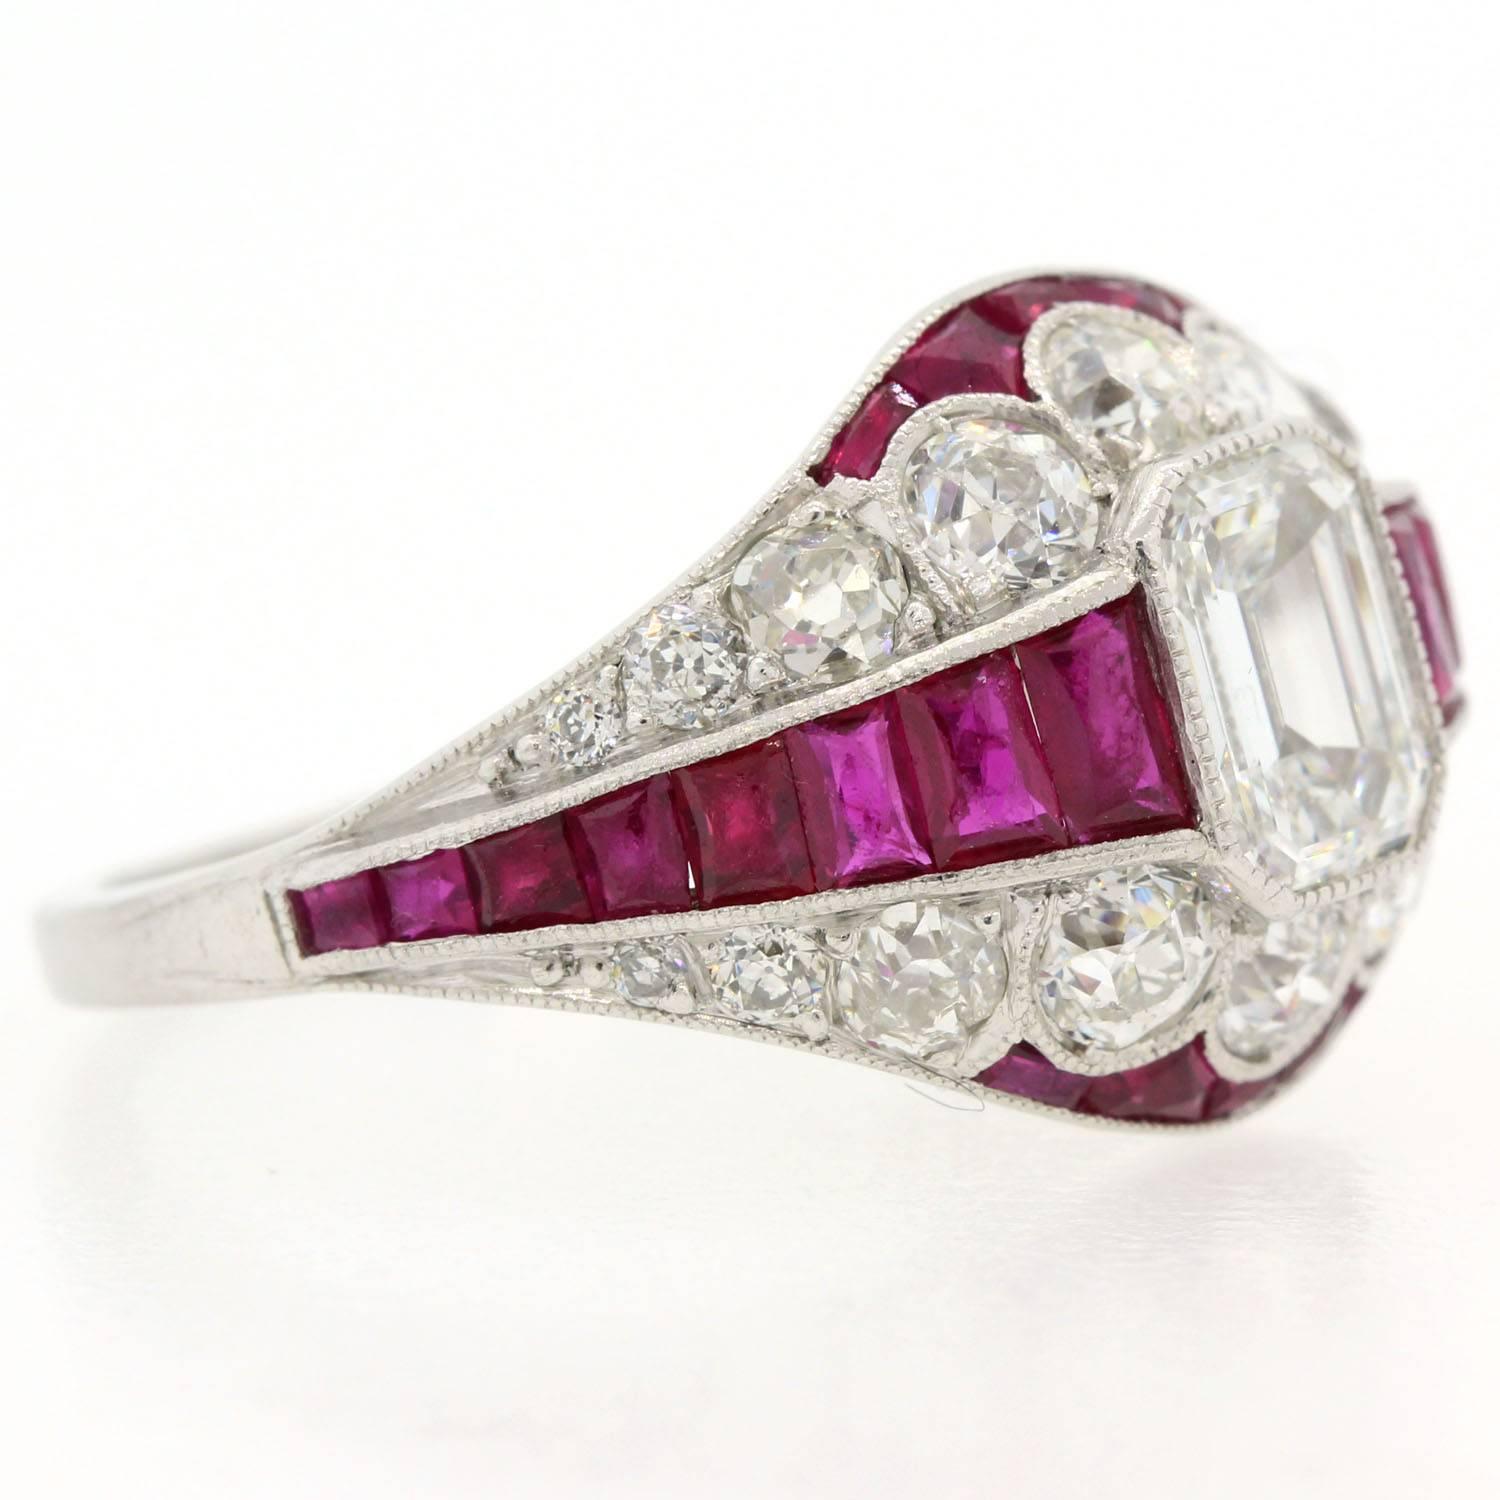 A brilliant Art Deco revival platinum ring set with Diamonds and Rubies.  This dome-like ring features an Emerald Cut Diamond weighing 0.81 carat of H/I color - VS2 clarity flanked with sixteen graduated French Cut Burma Rubies.  The setting is 